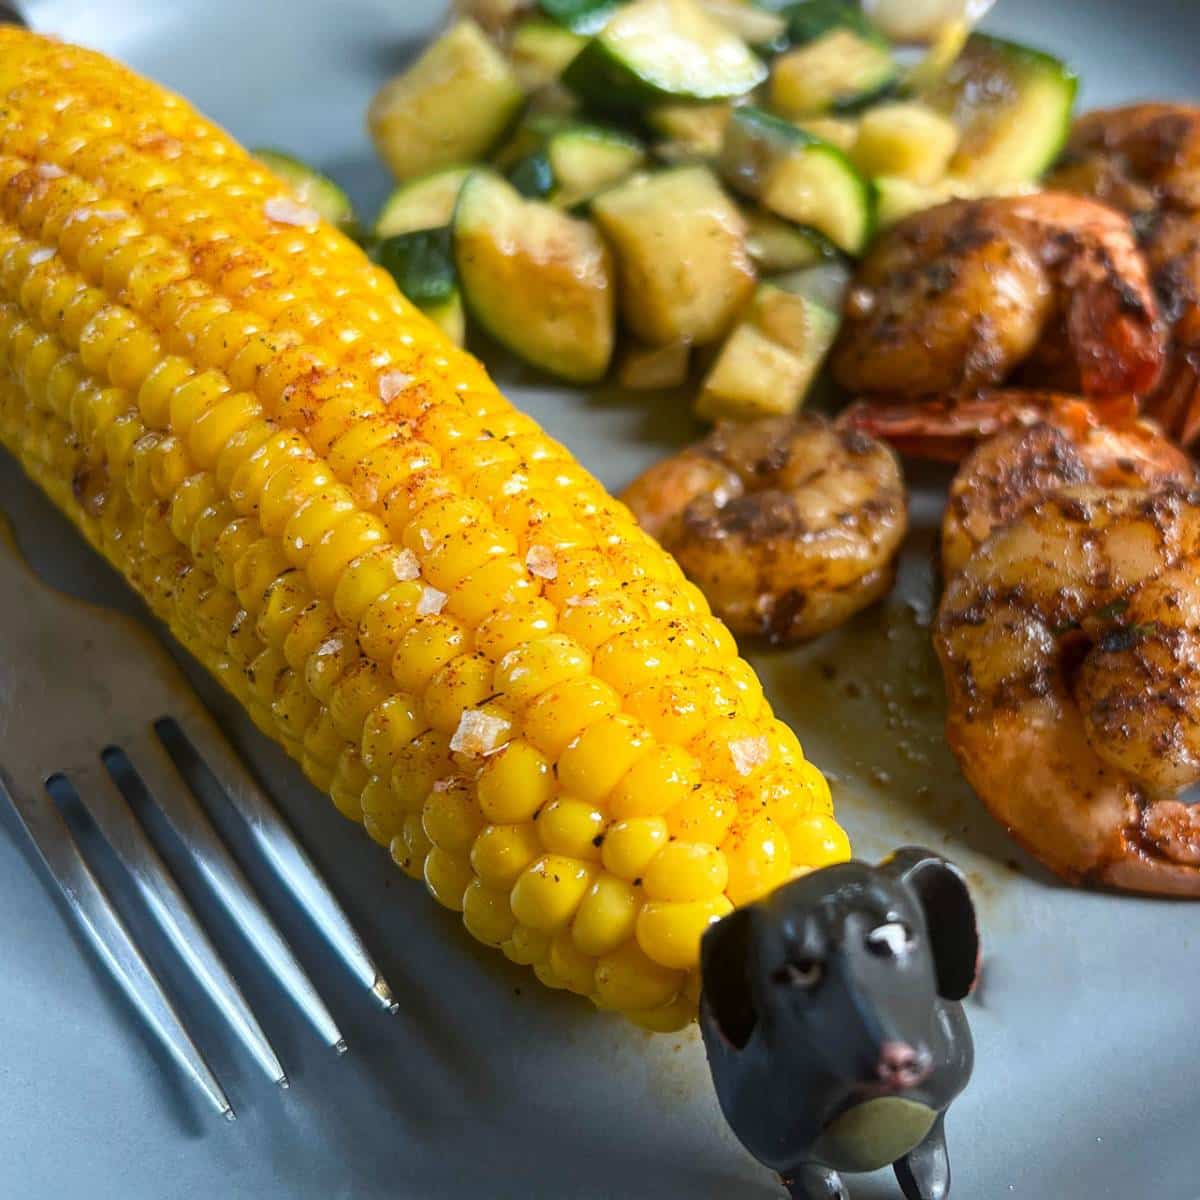 corn on the cob on a plate with shrimp and zucchini